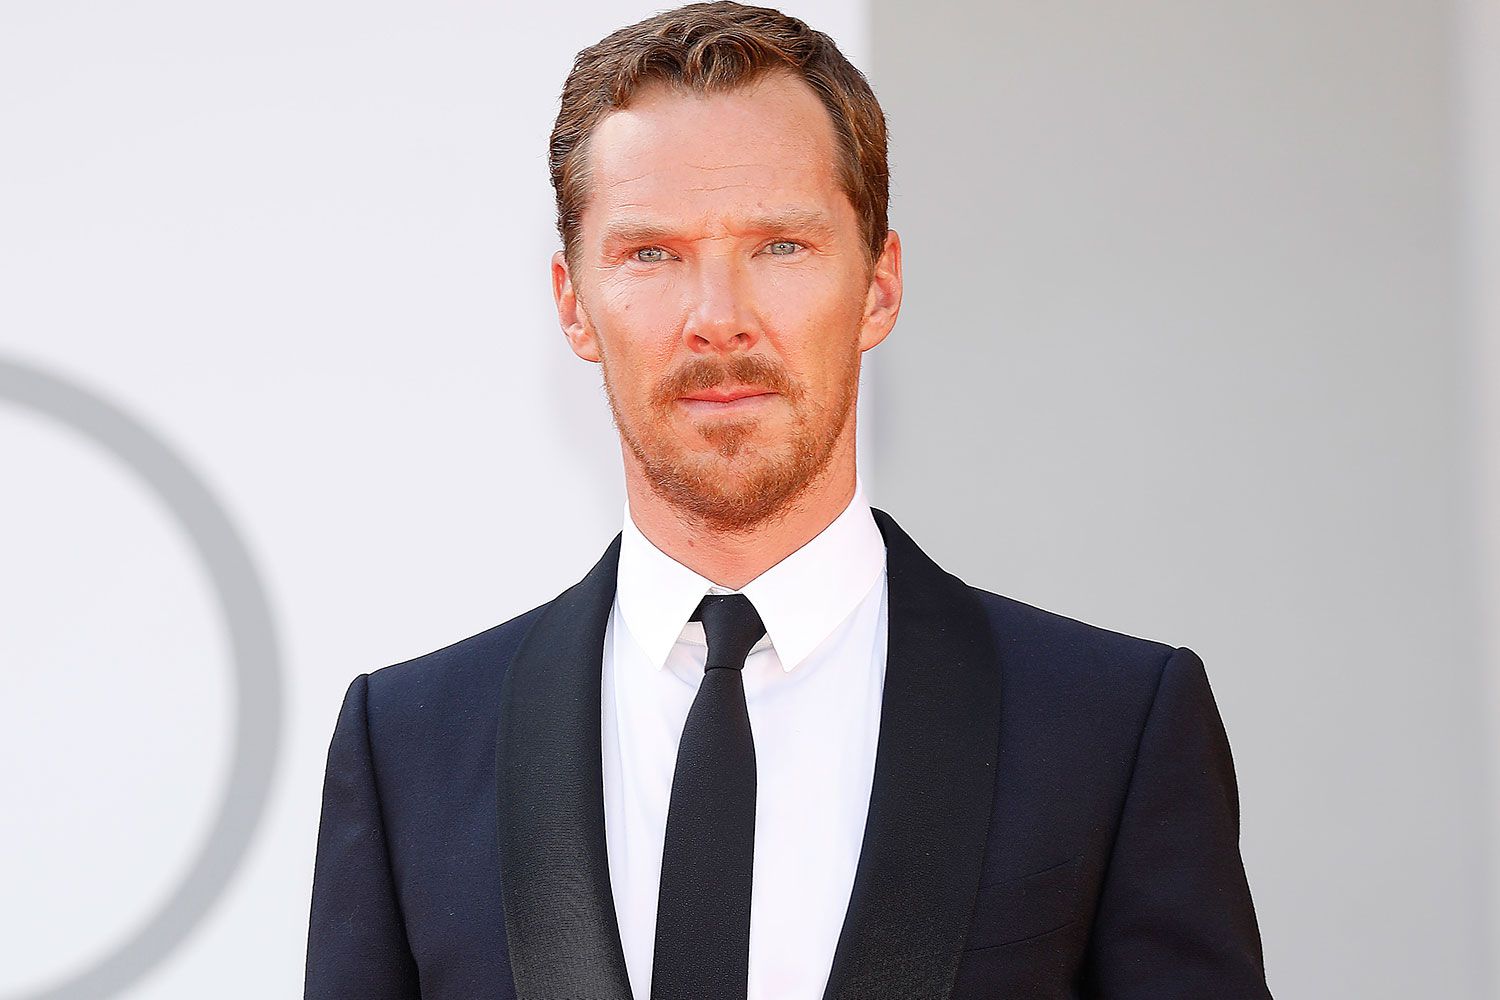 30 Interesting Things Most People Don’t Know About Benedict Cumberbatch